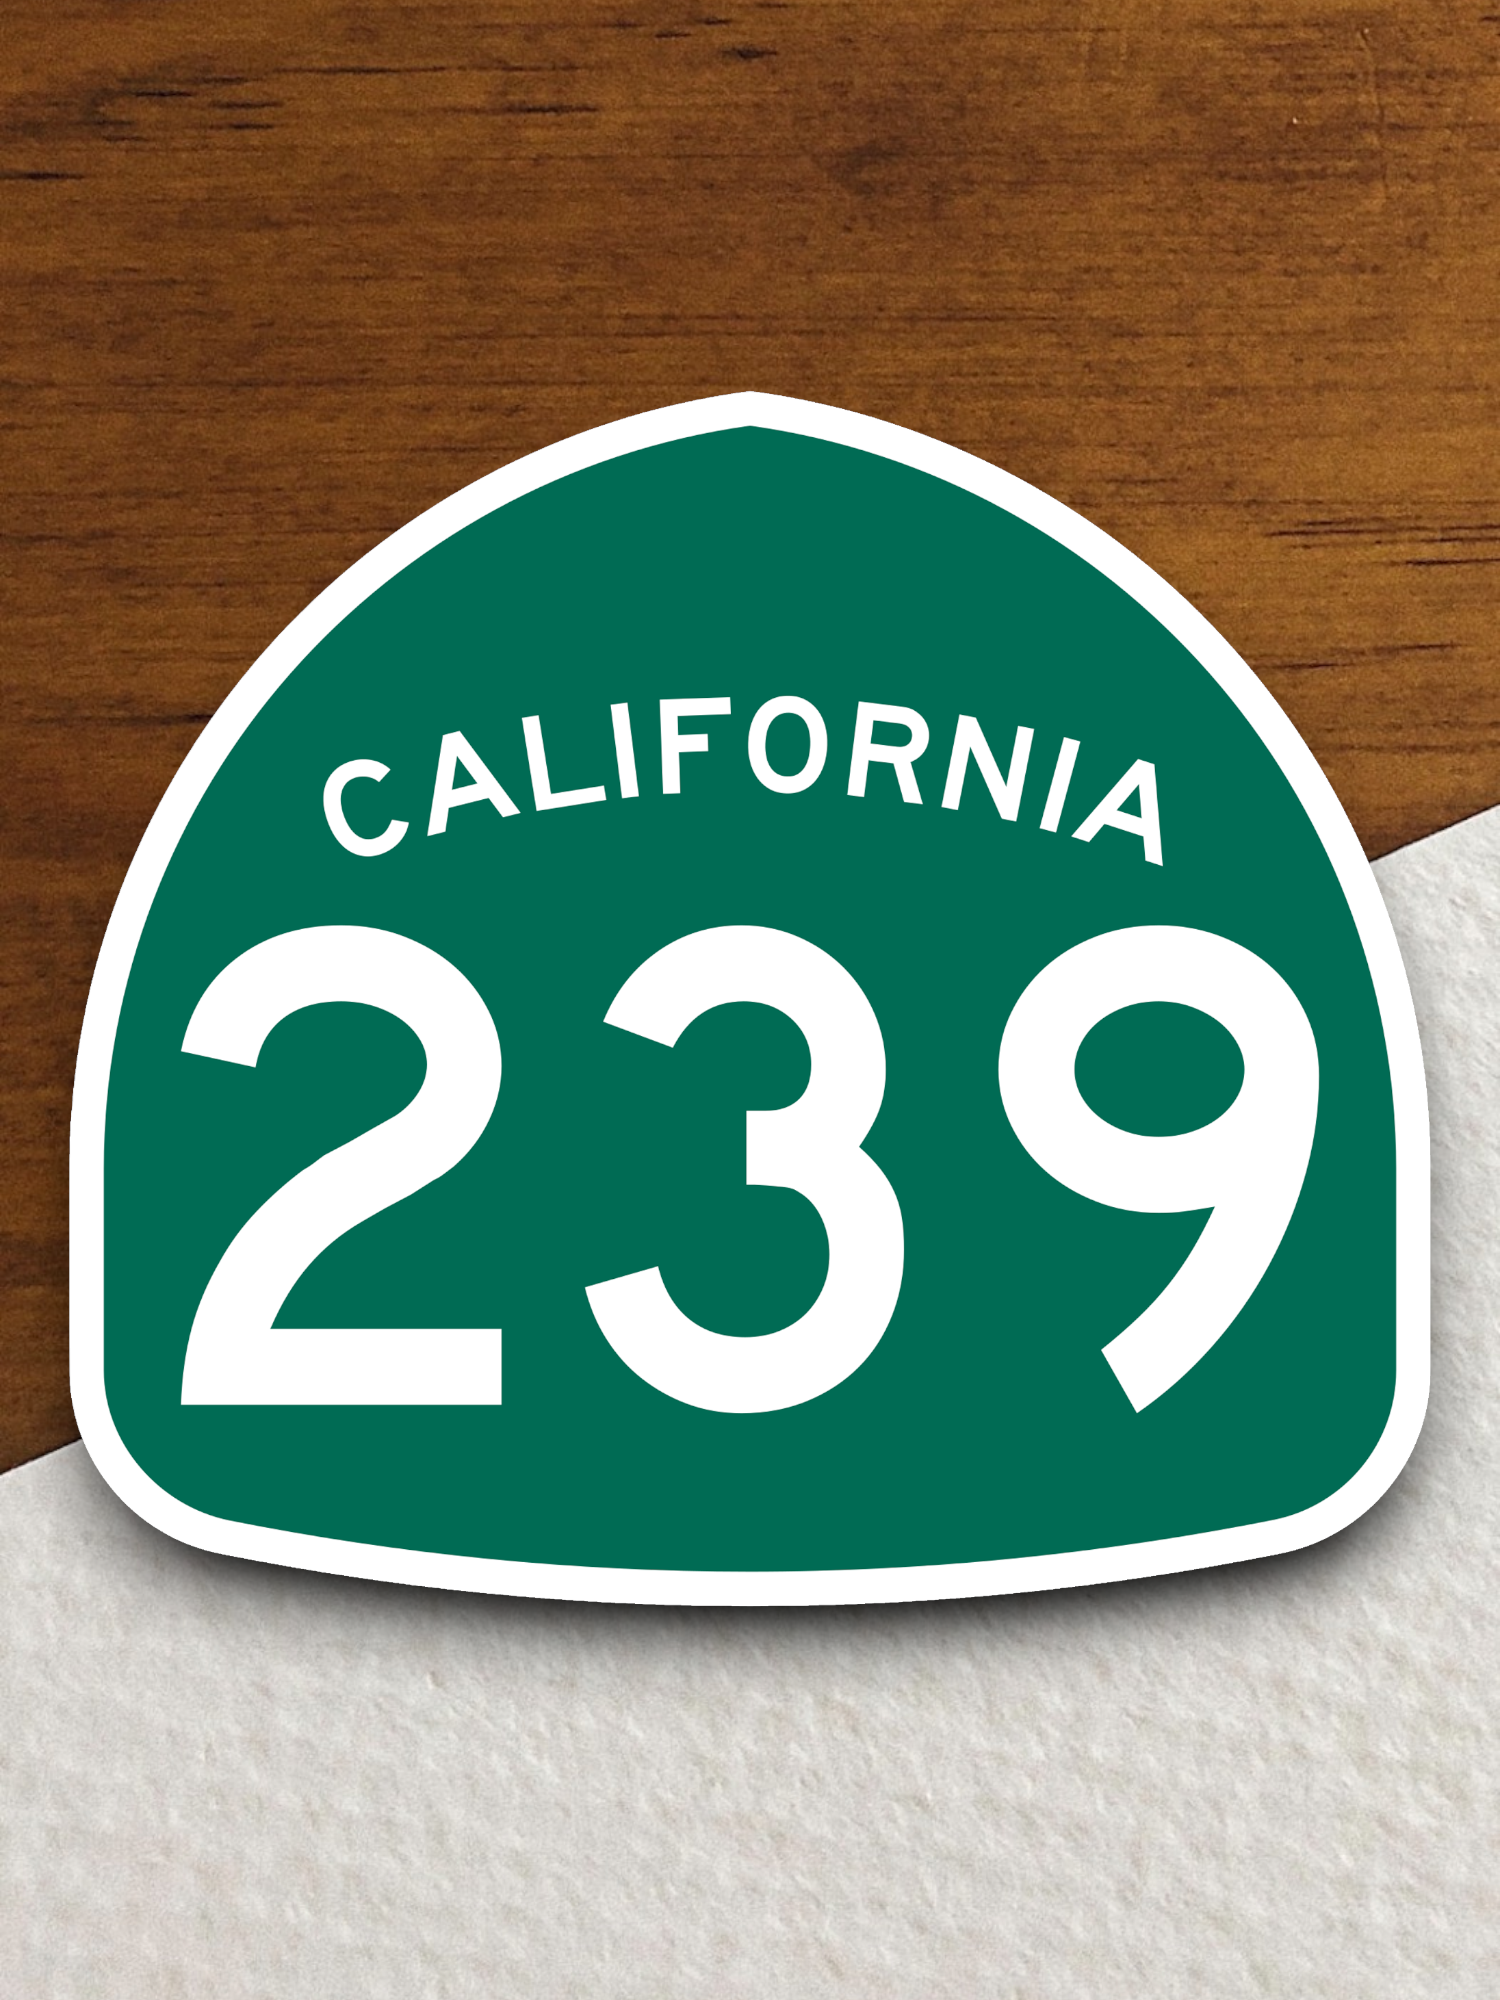 California State Route 239 Road Sign Sticker